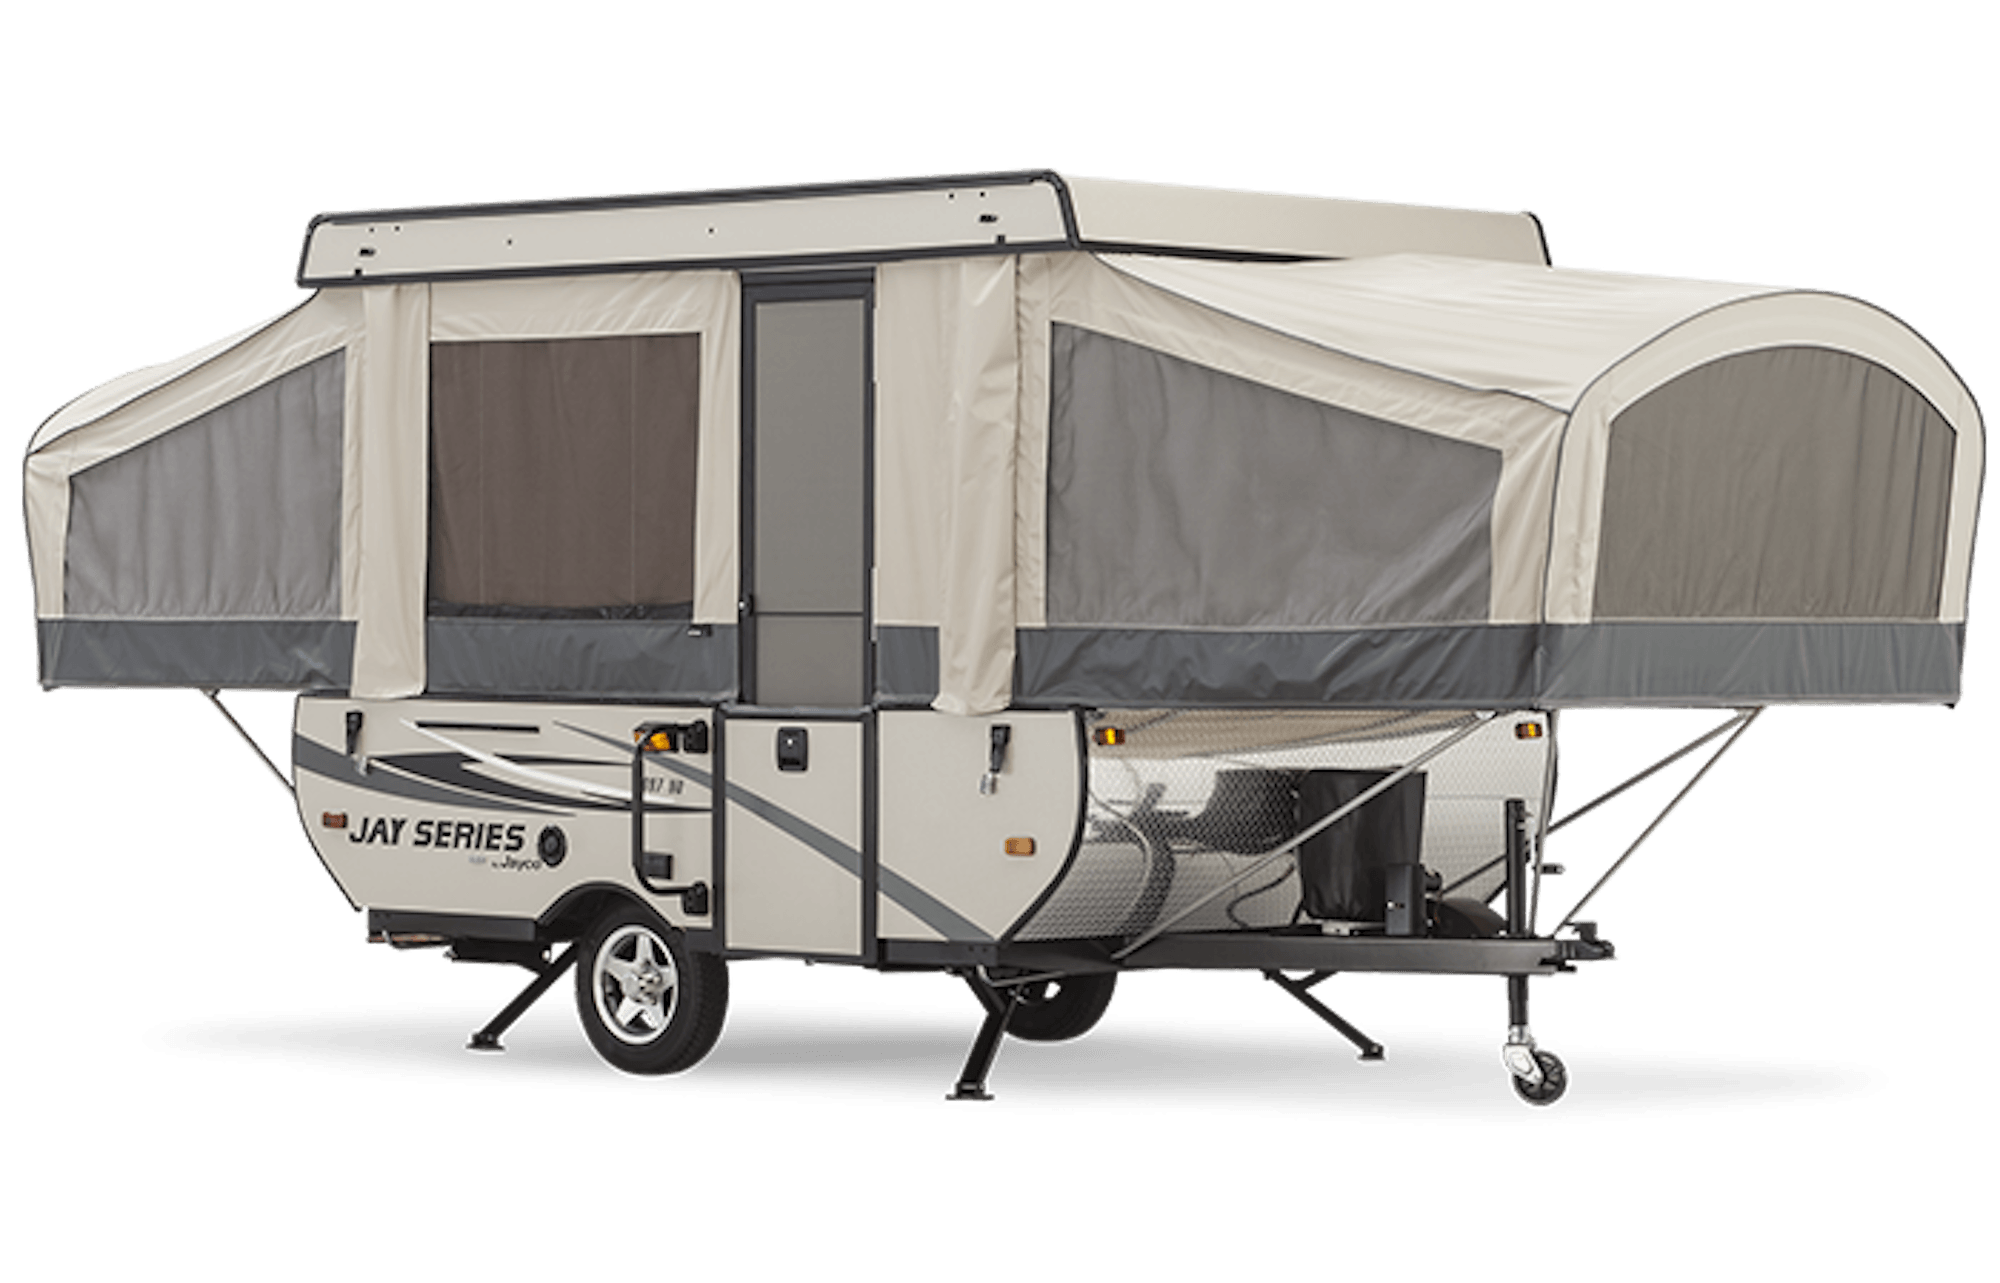 The perfect loan for your dream camper trailer is only a few clicks away